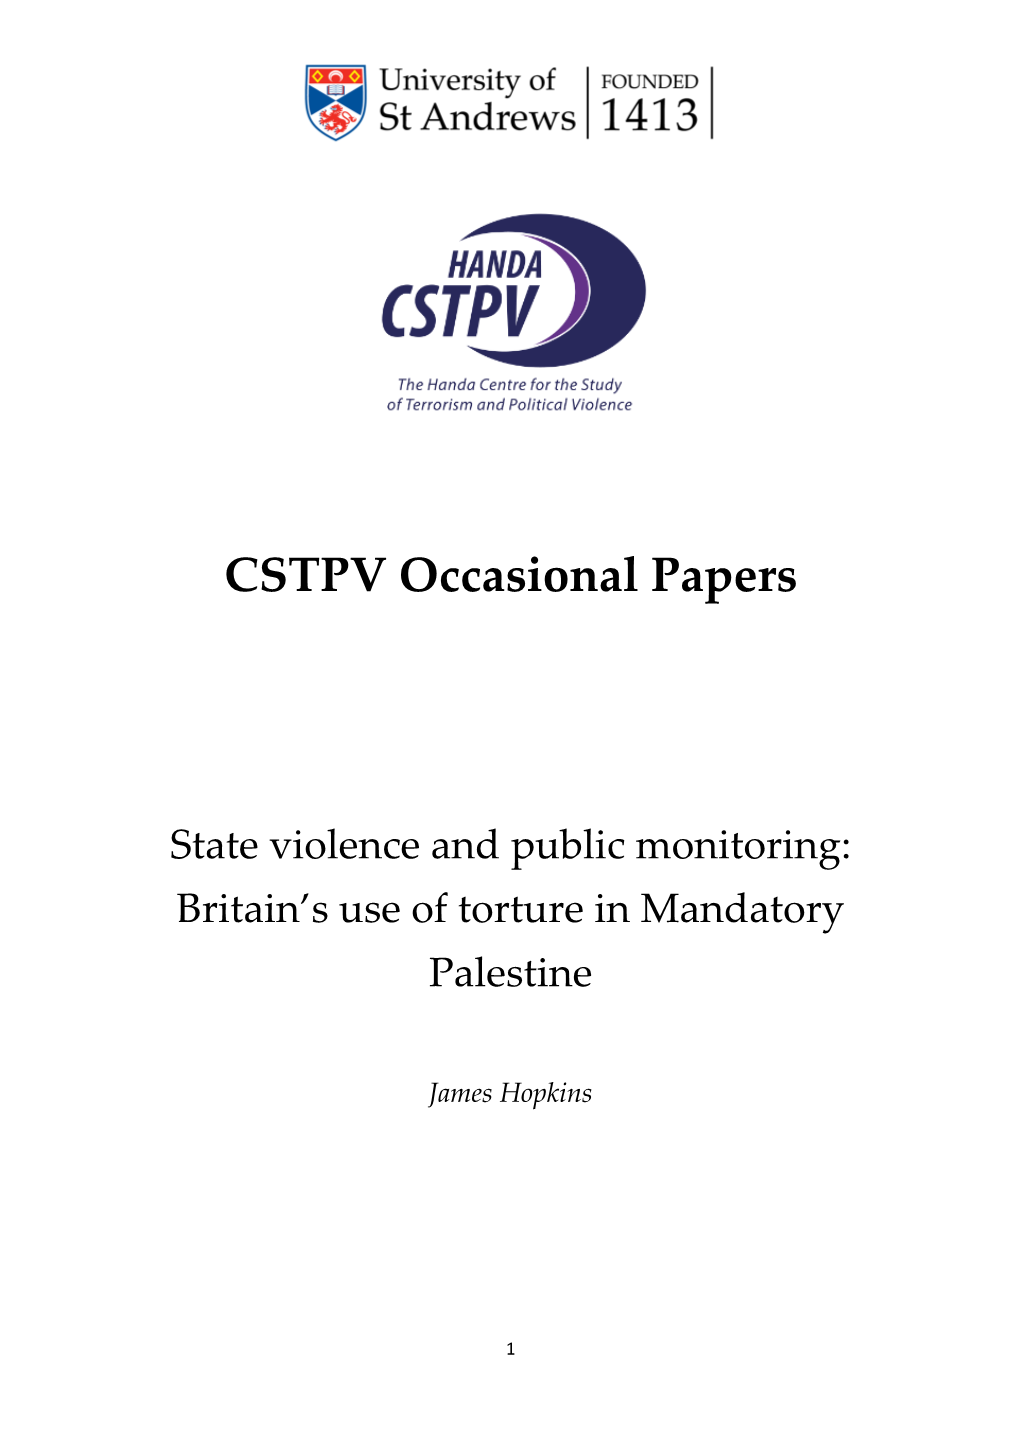 CSTPV Occasional Papers